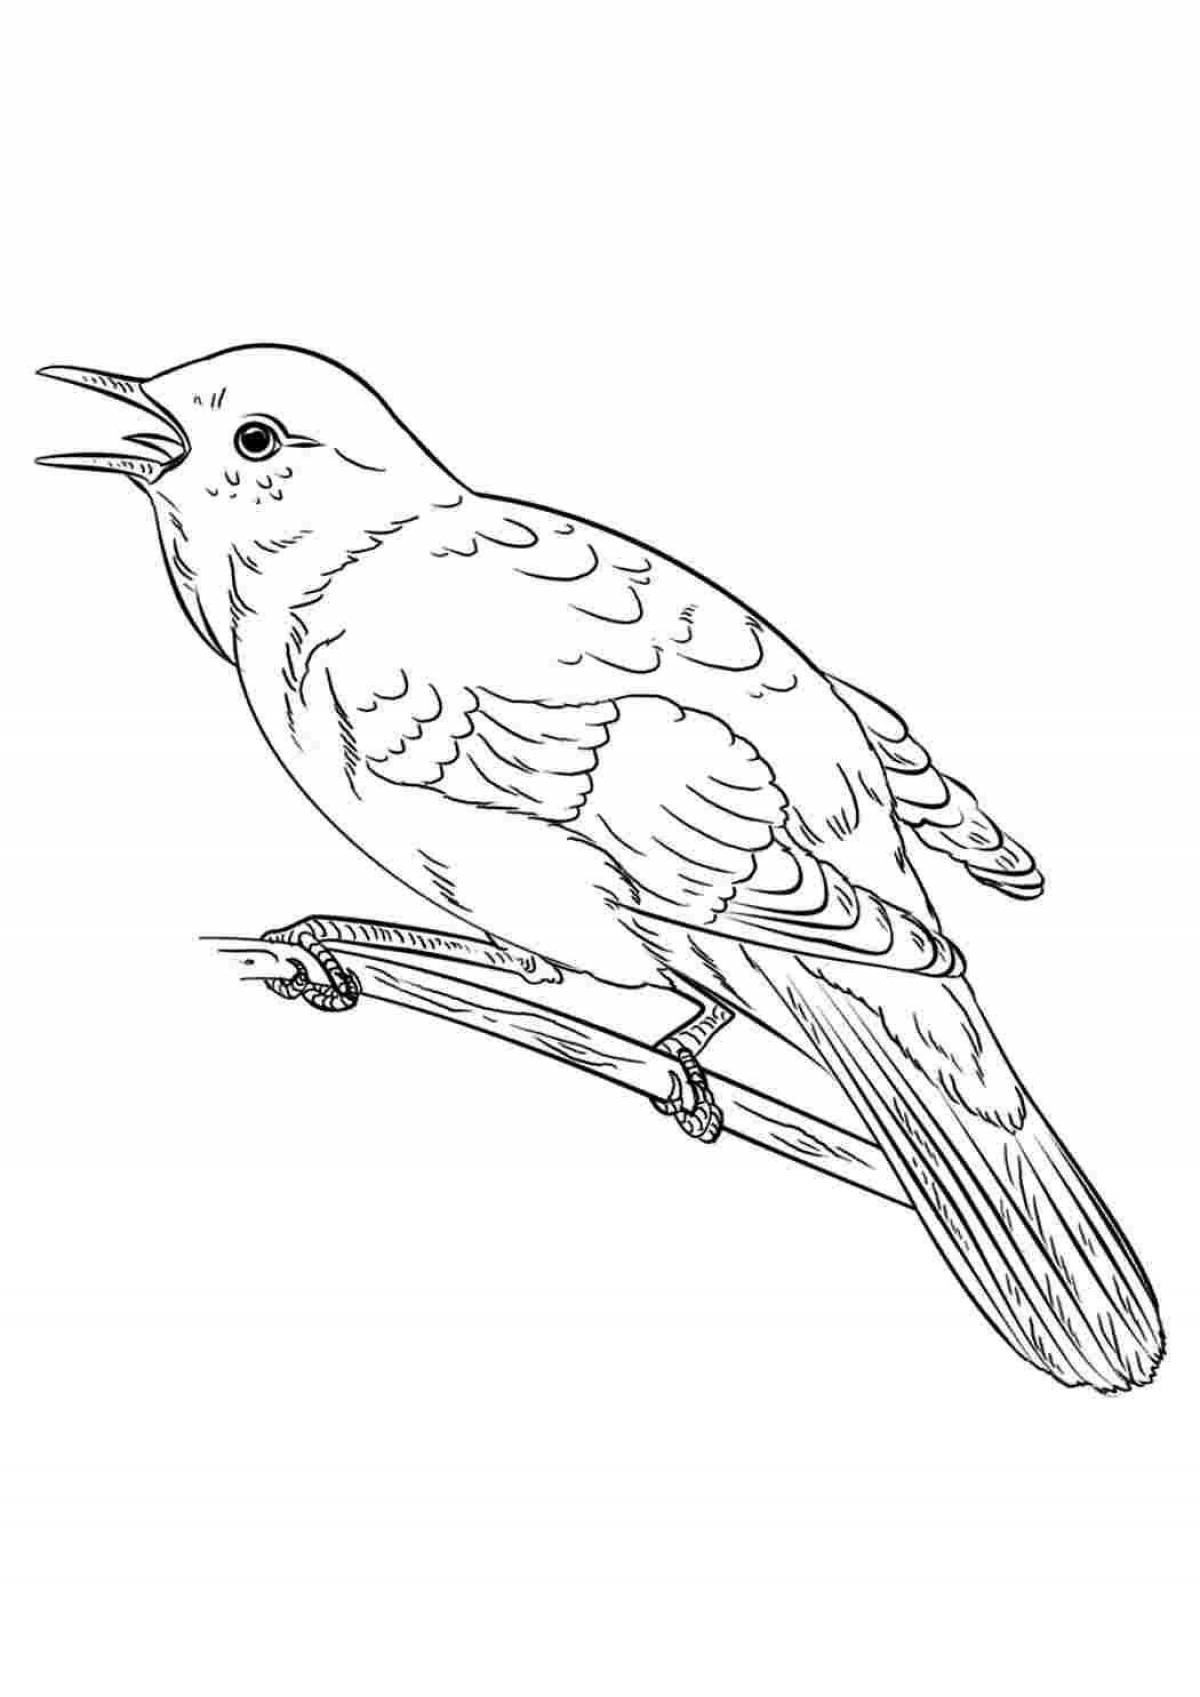 Adorable cuckoo coloring book for kids